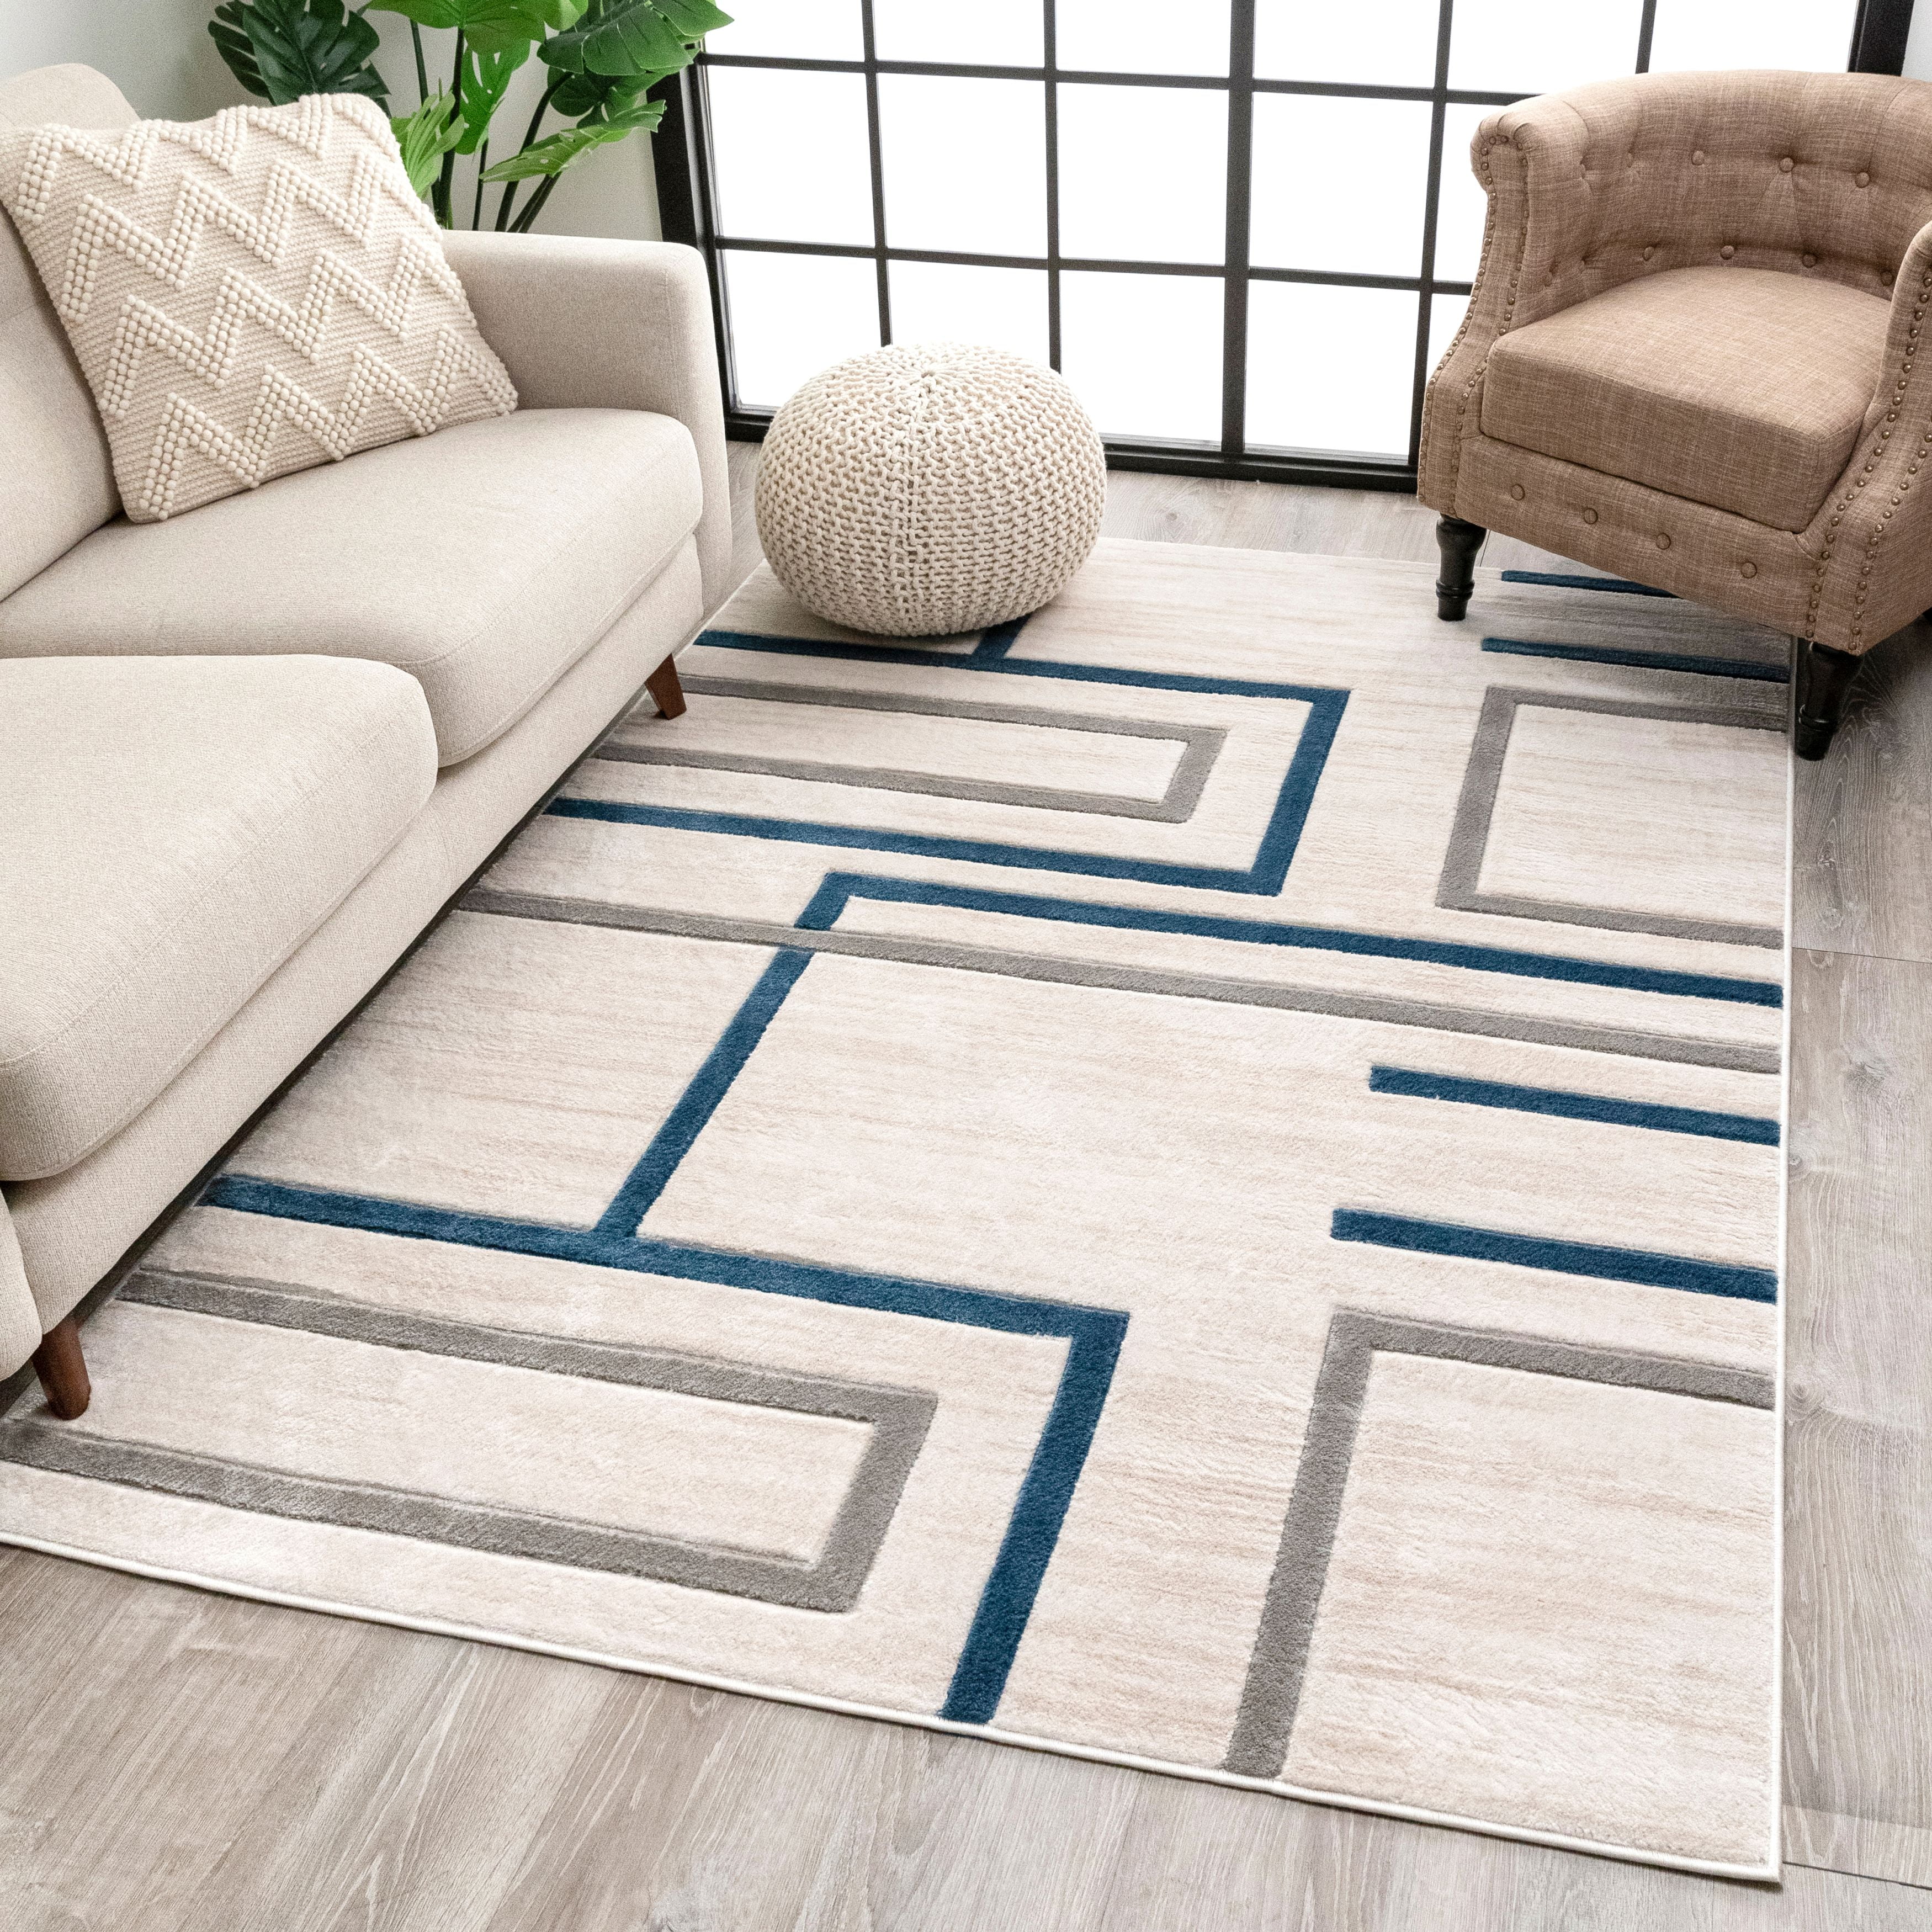 Well Woven Fiora Blue Modern Geometric Stripes & Boxes Pattern Area Rug